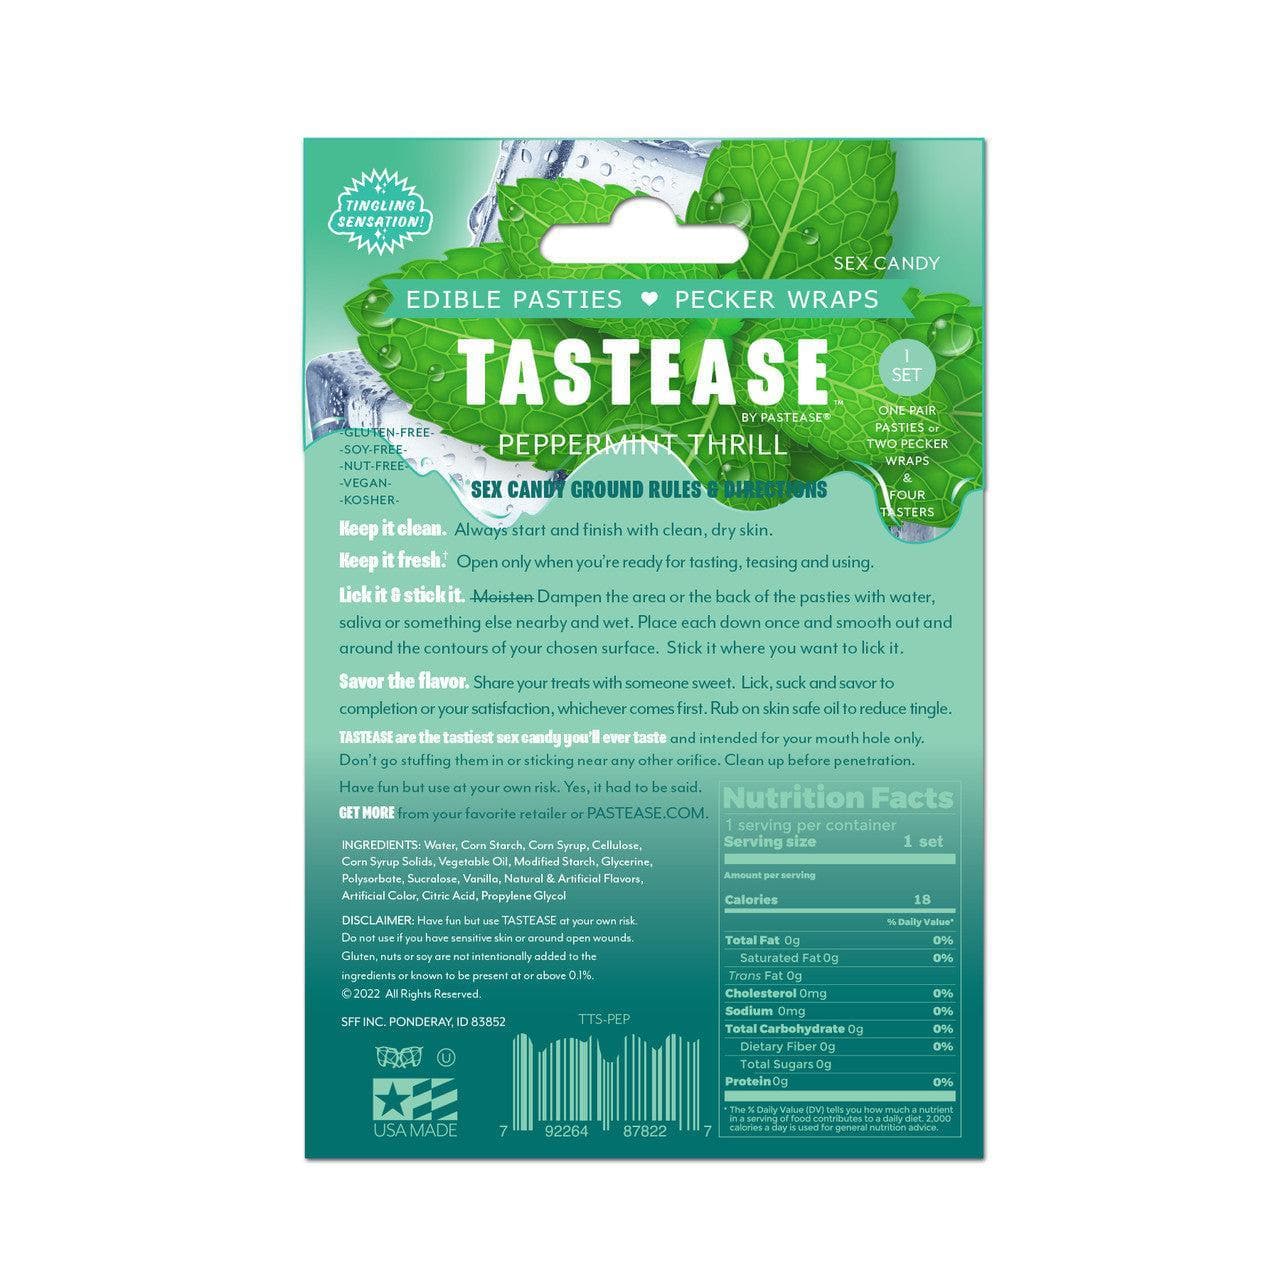 Tastease by Pastease Peppermint Thrill Candy Edible Pasties & Pecker Wraps - Romantic Blessings